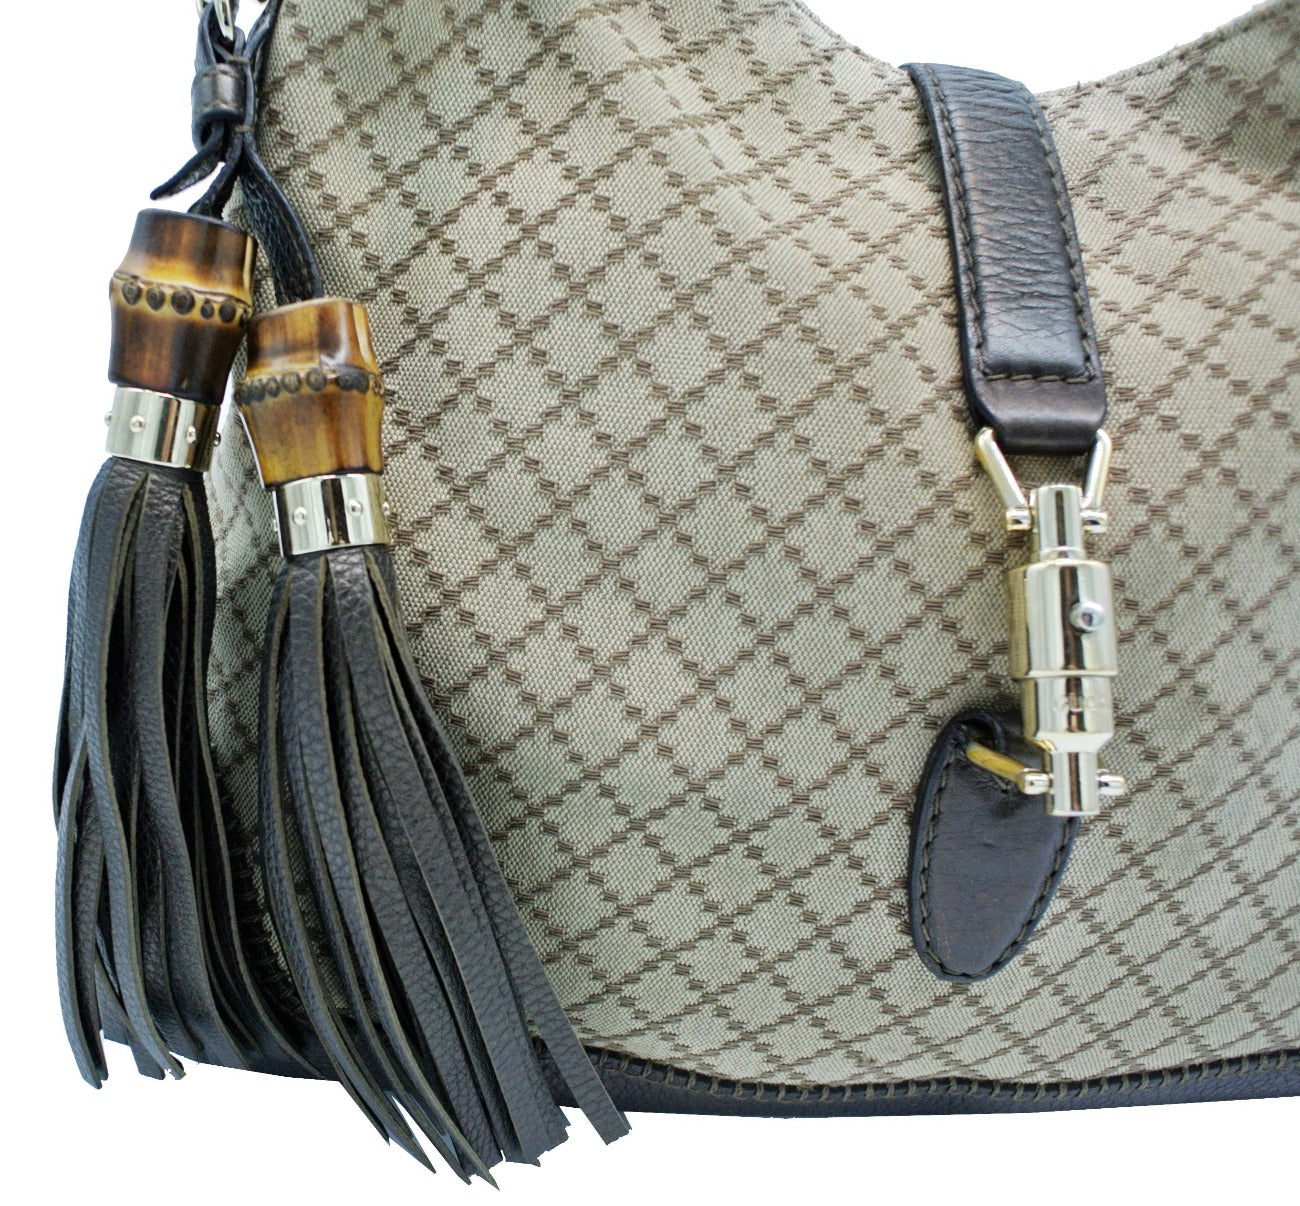 Gucci Beige with Bronze Diamante Canvas and Leather Jackie Hobo Bag Gucci